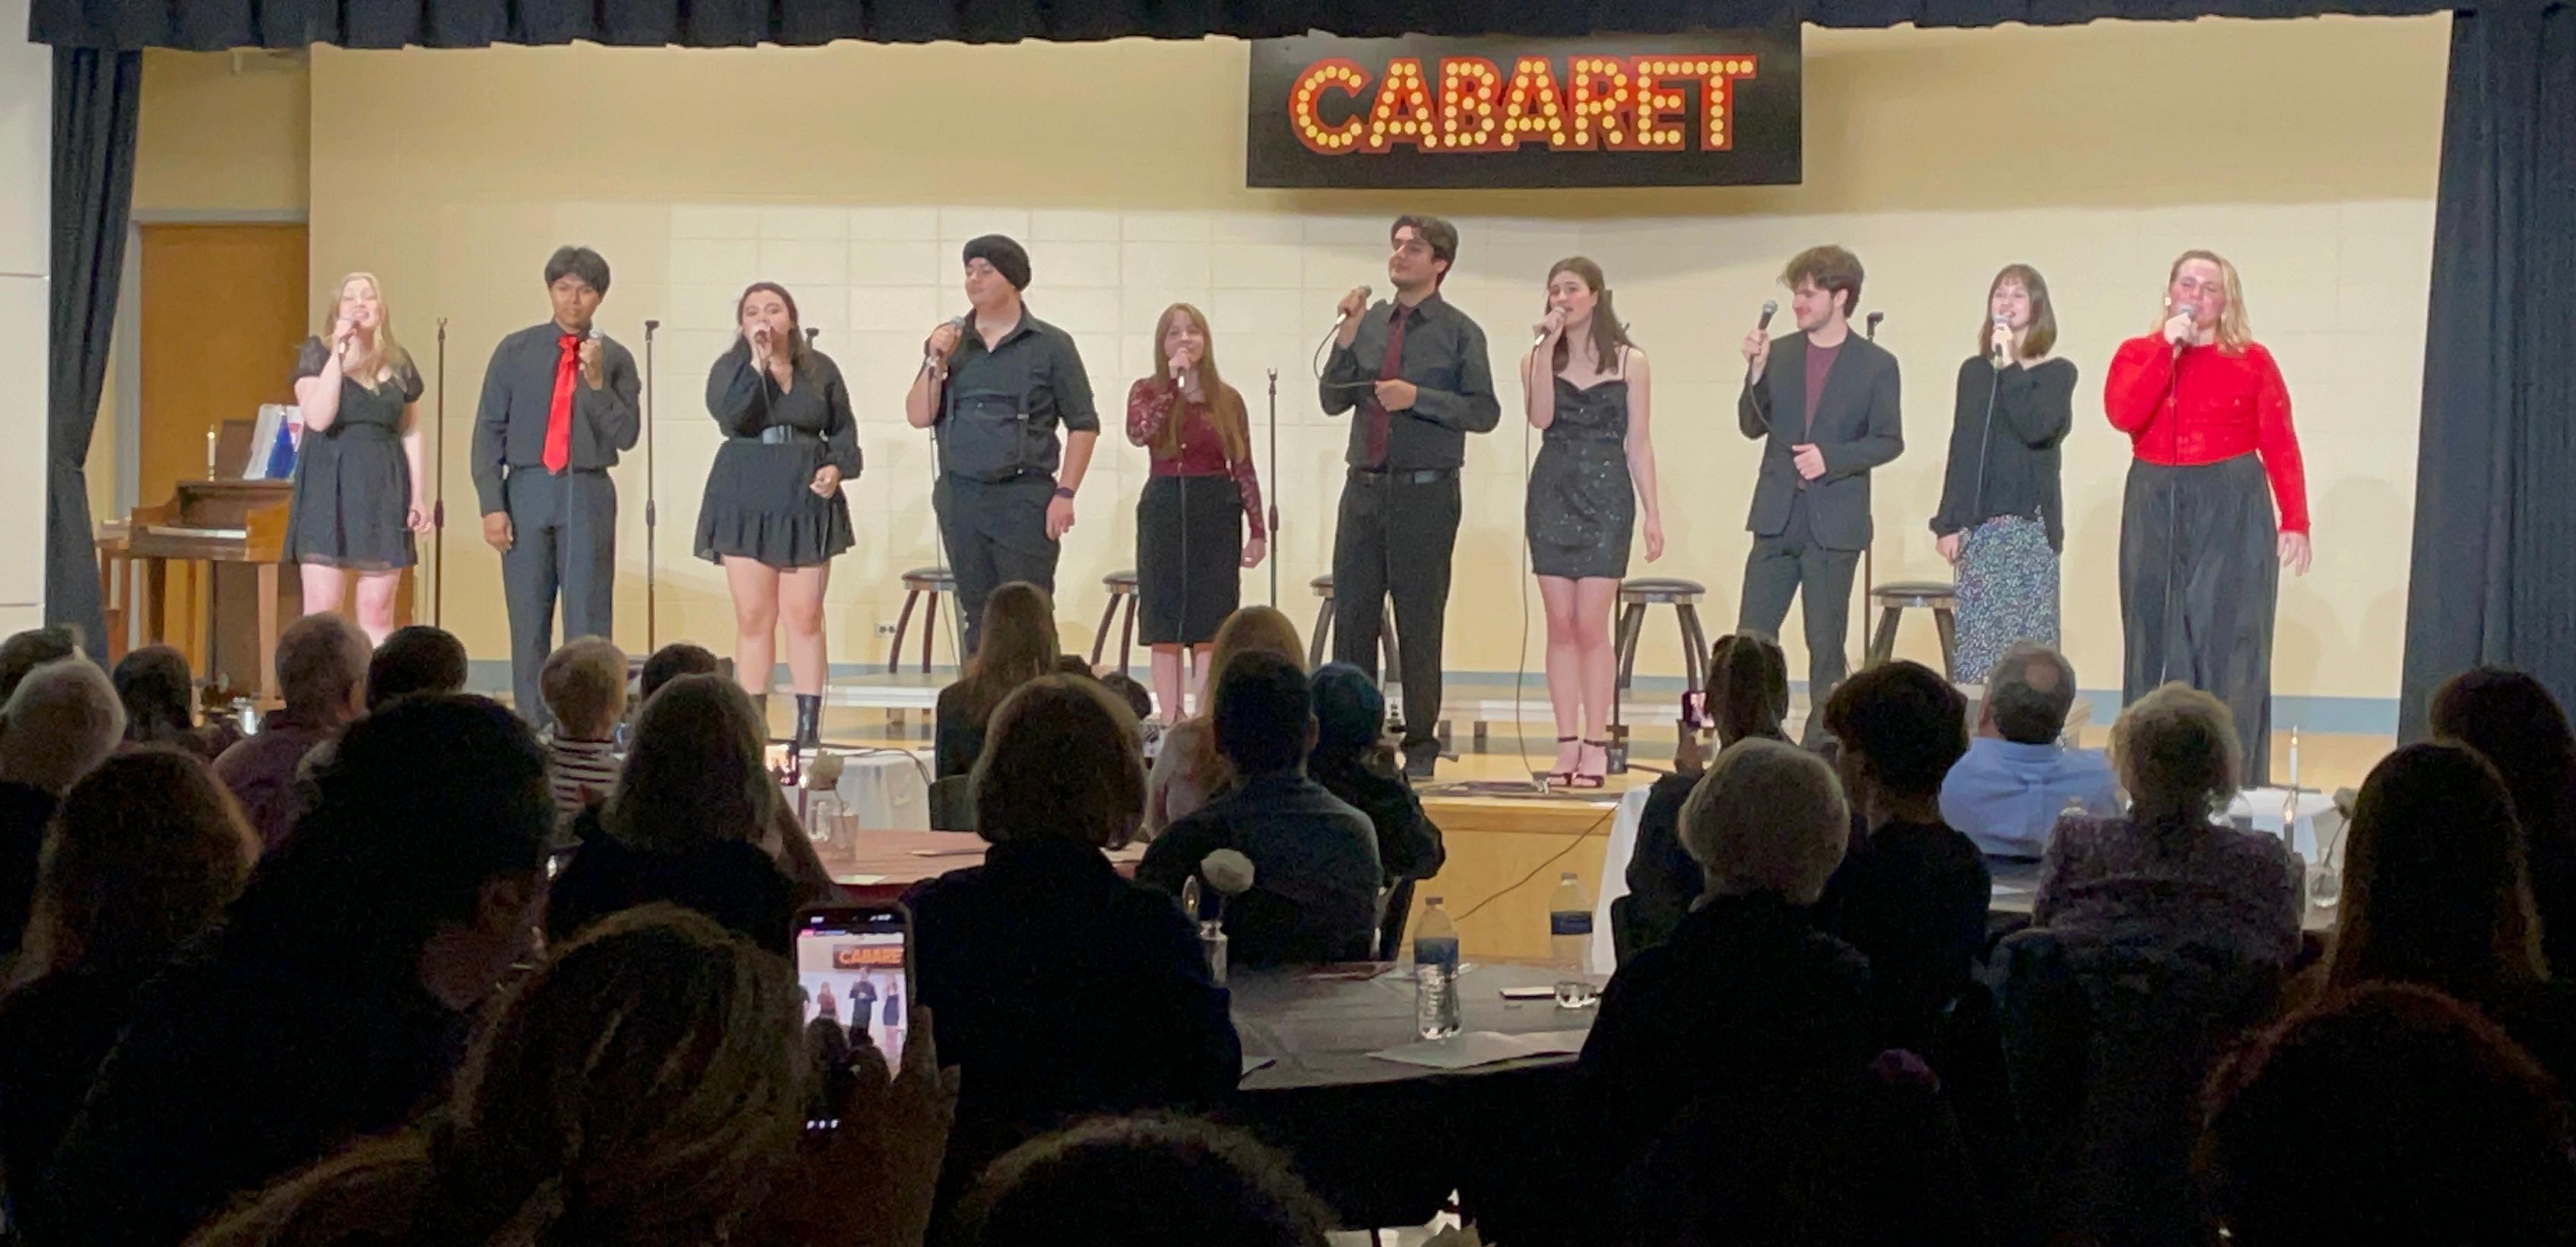 Willowbrook hosts ‘A Night at the Cabaret’ music event